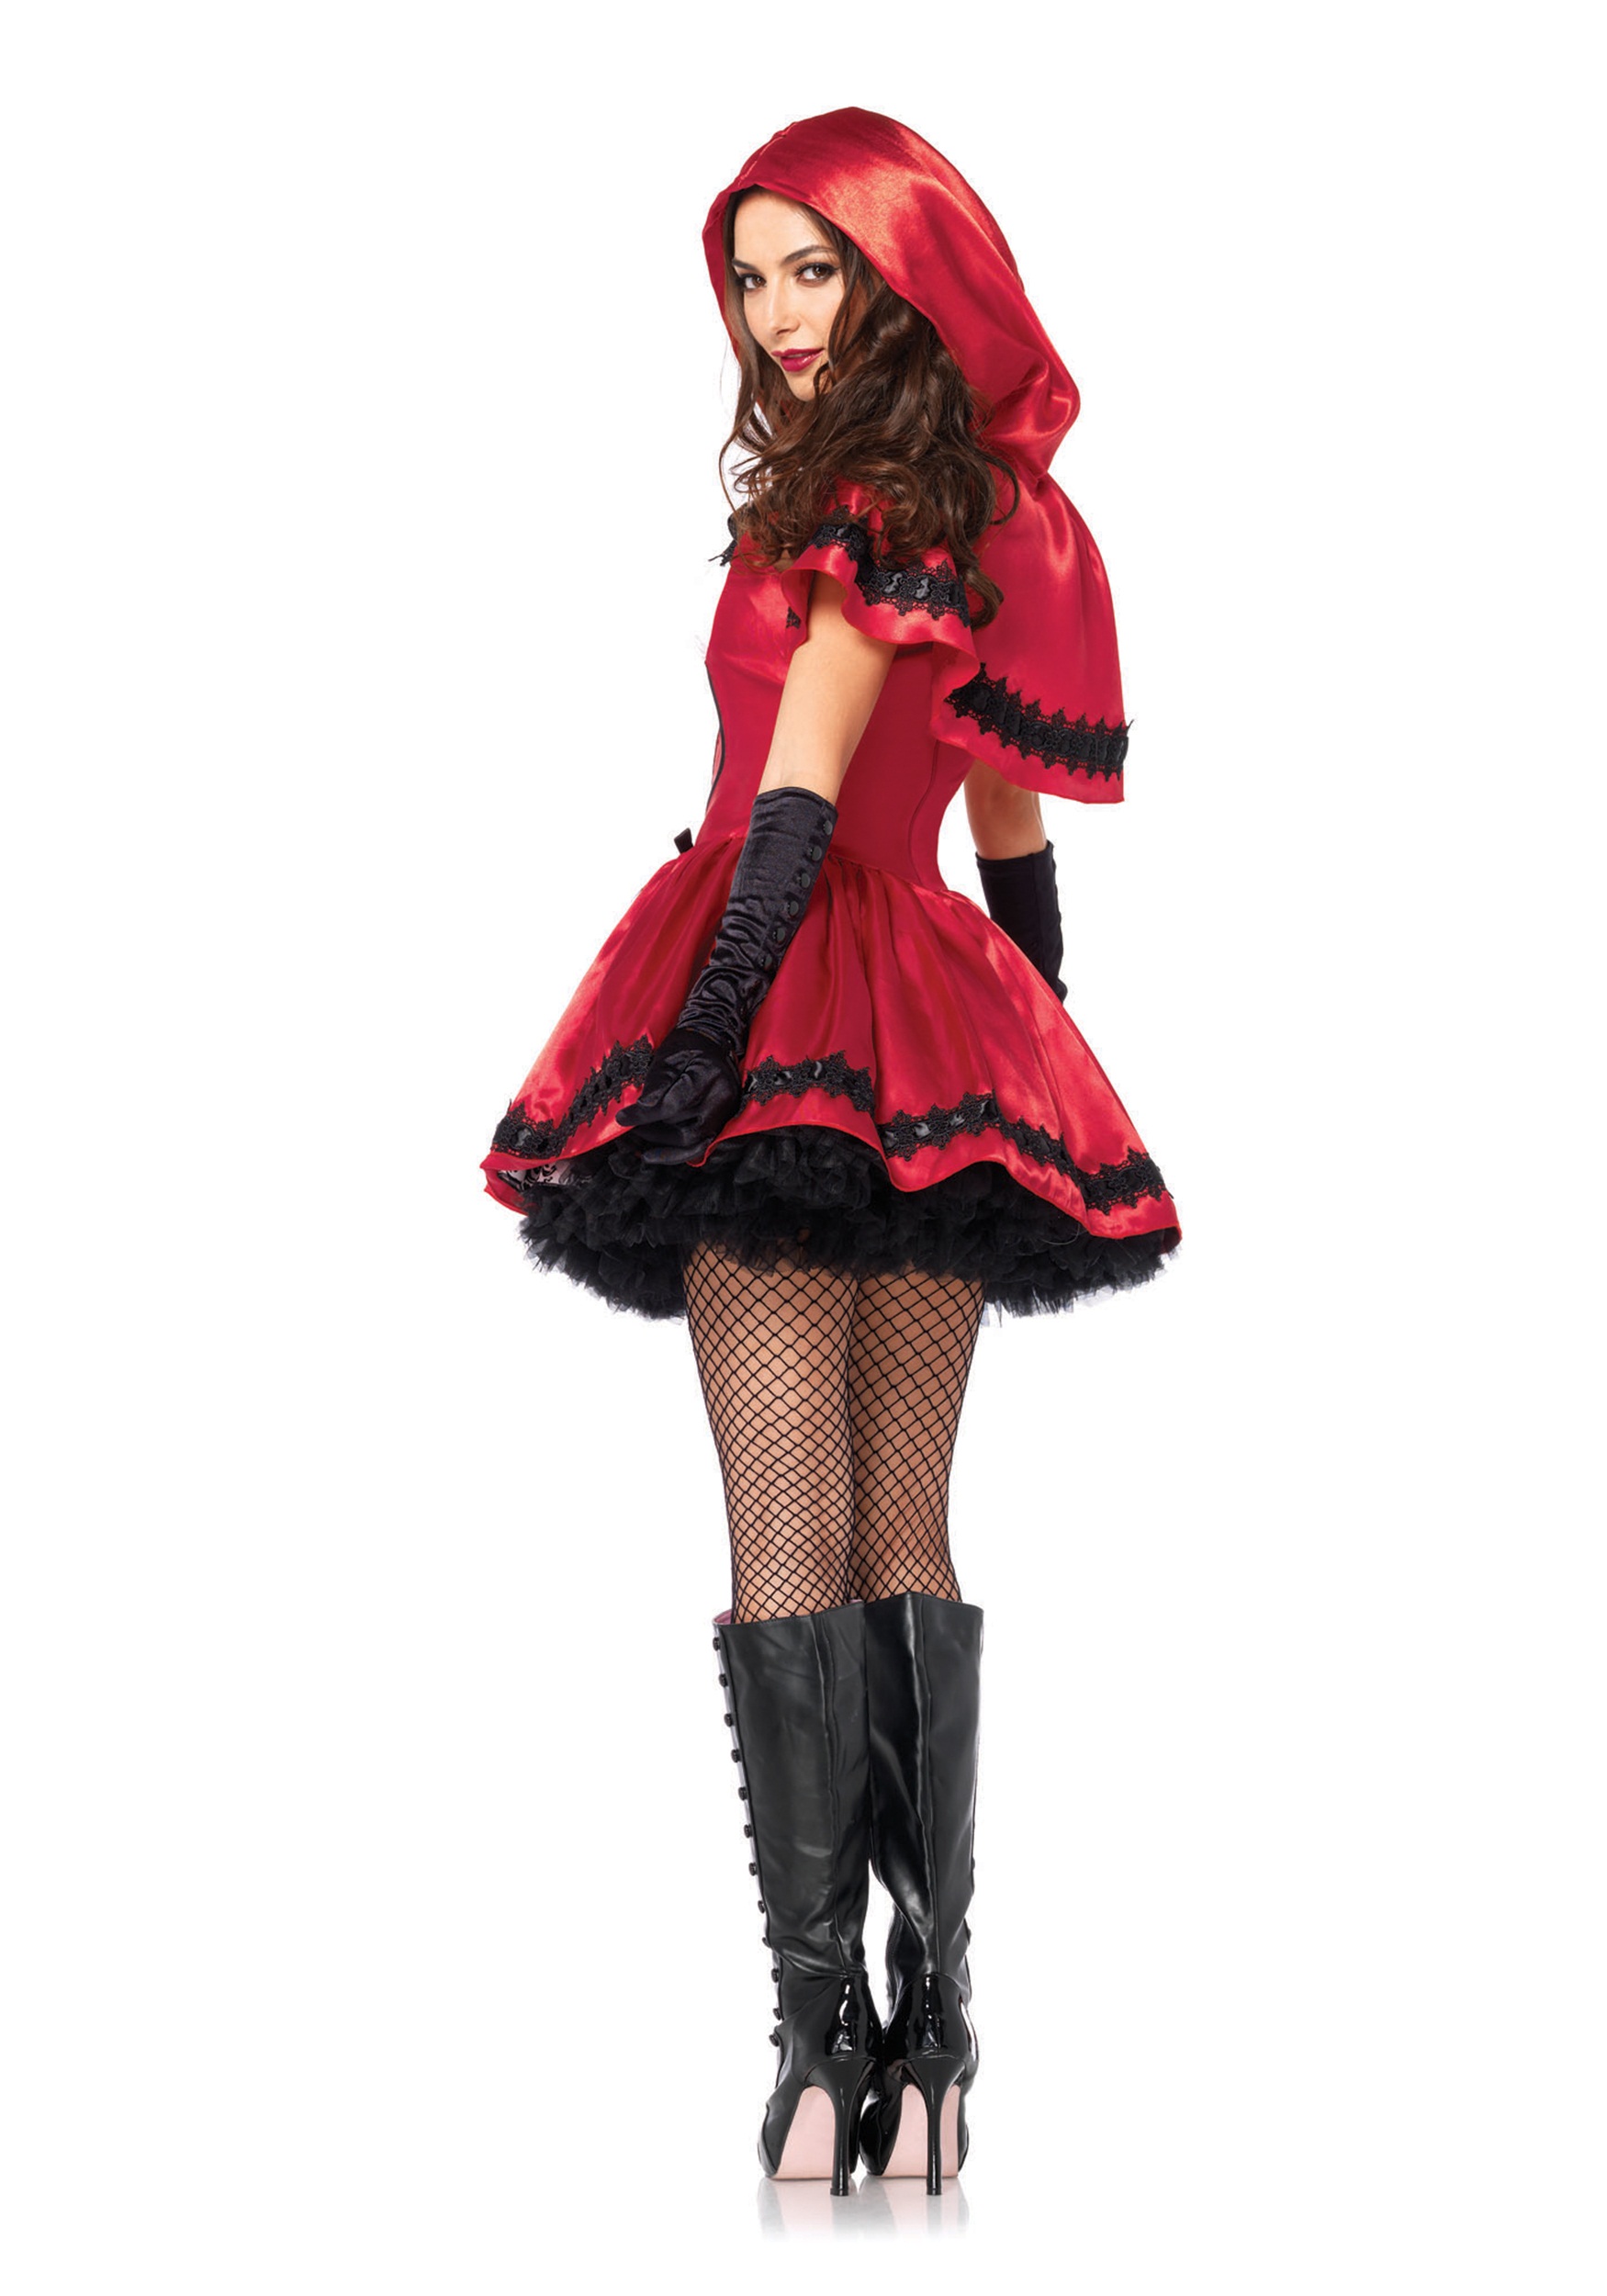 Red Riding Hood Costume Adult 23